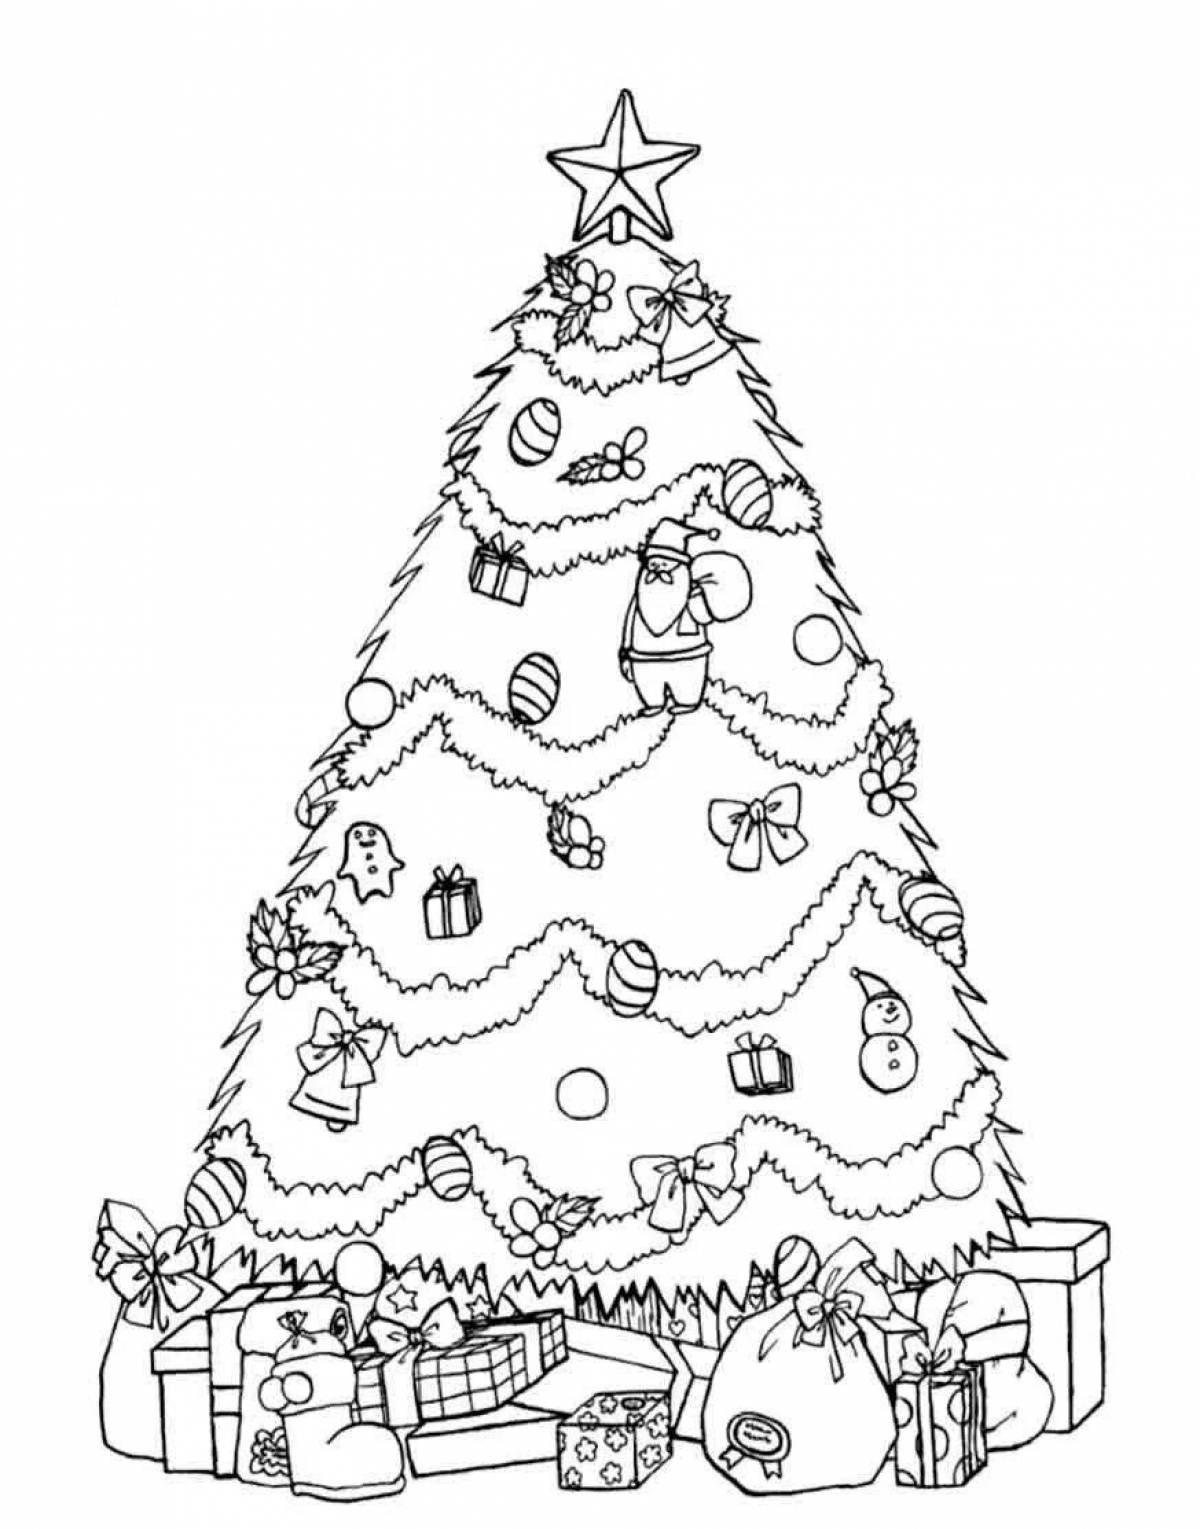 Blooming Christmas tree coloring book